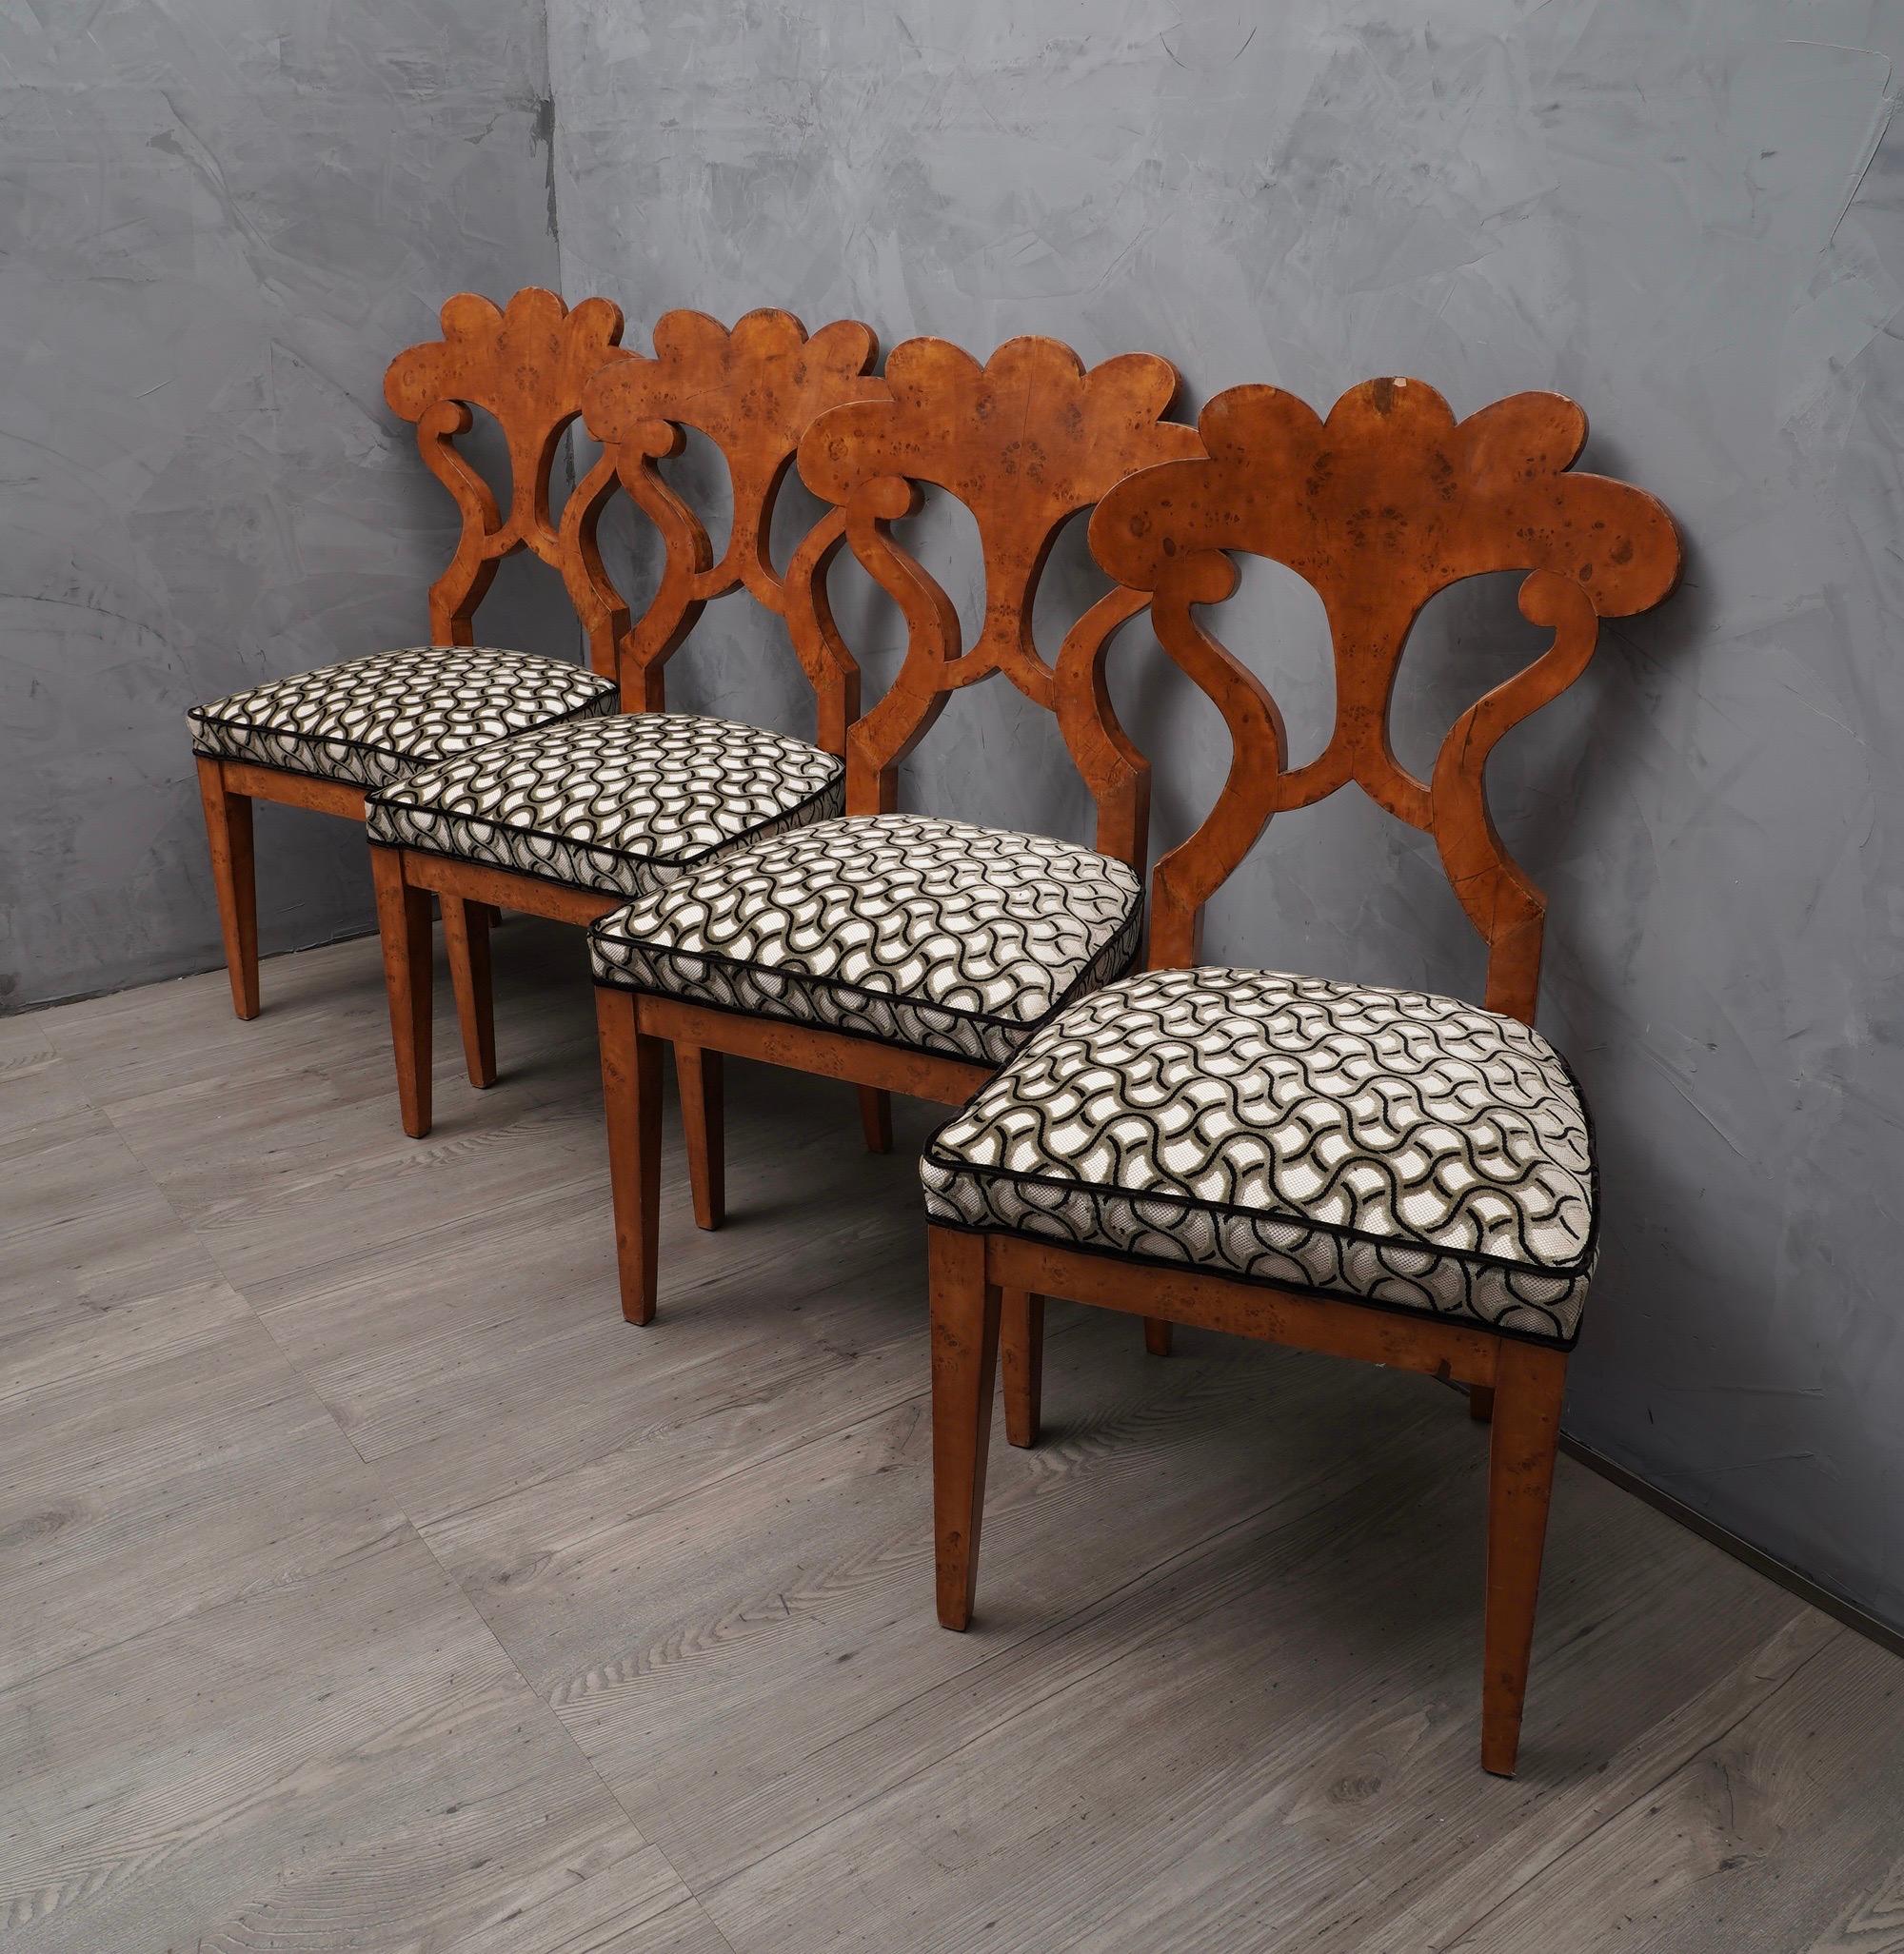 Spectacular Biedermeier chairs with a unique and original design, a precursor style of the times still current today.

The four chairs are veneered in poplar briar wood, have a rich backrest in the shape of daisy petals, which is what characterizes